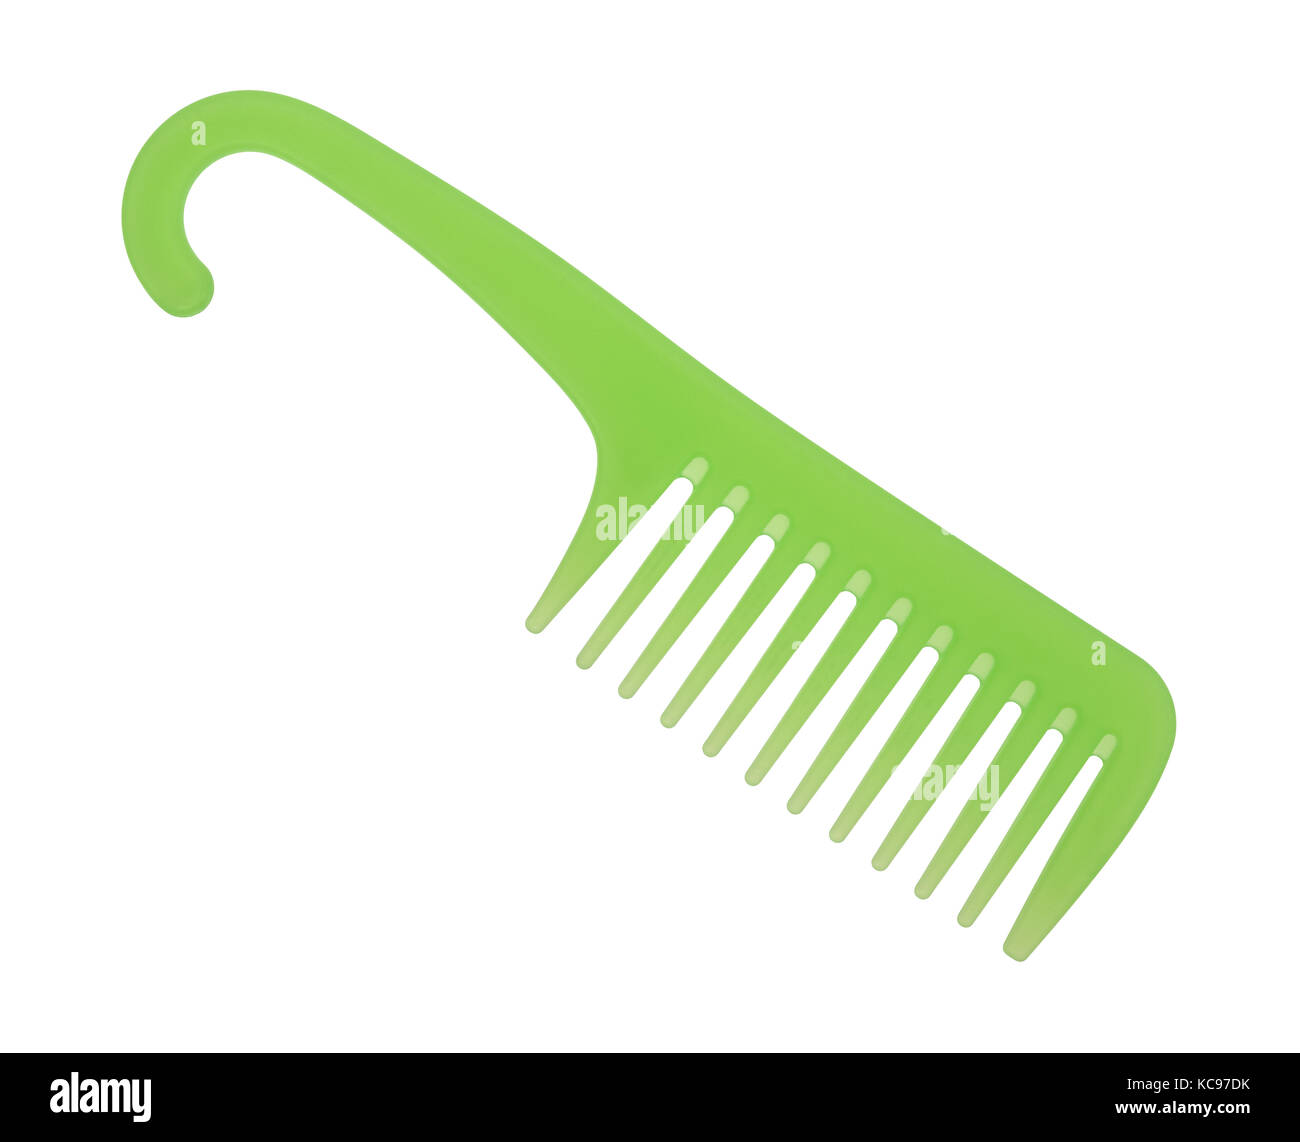 Top view of a large green wide toothed detangling comb isolated on a white background. Stock Photo